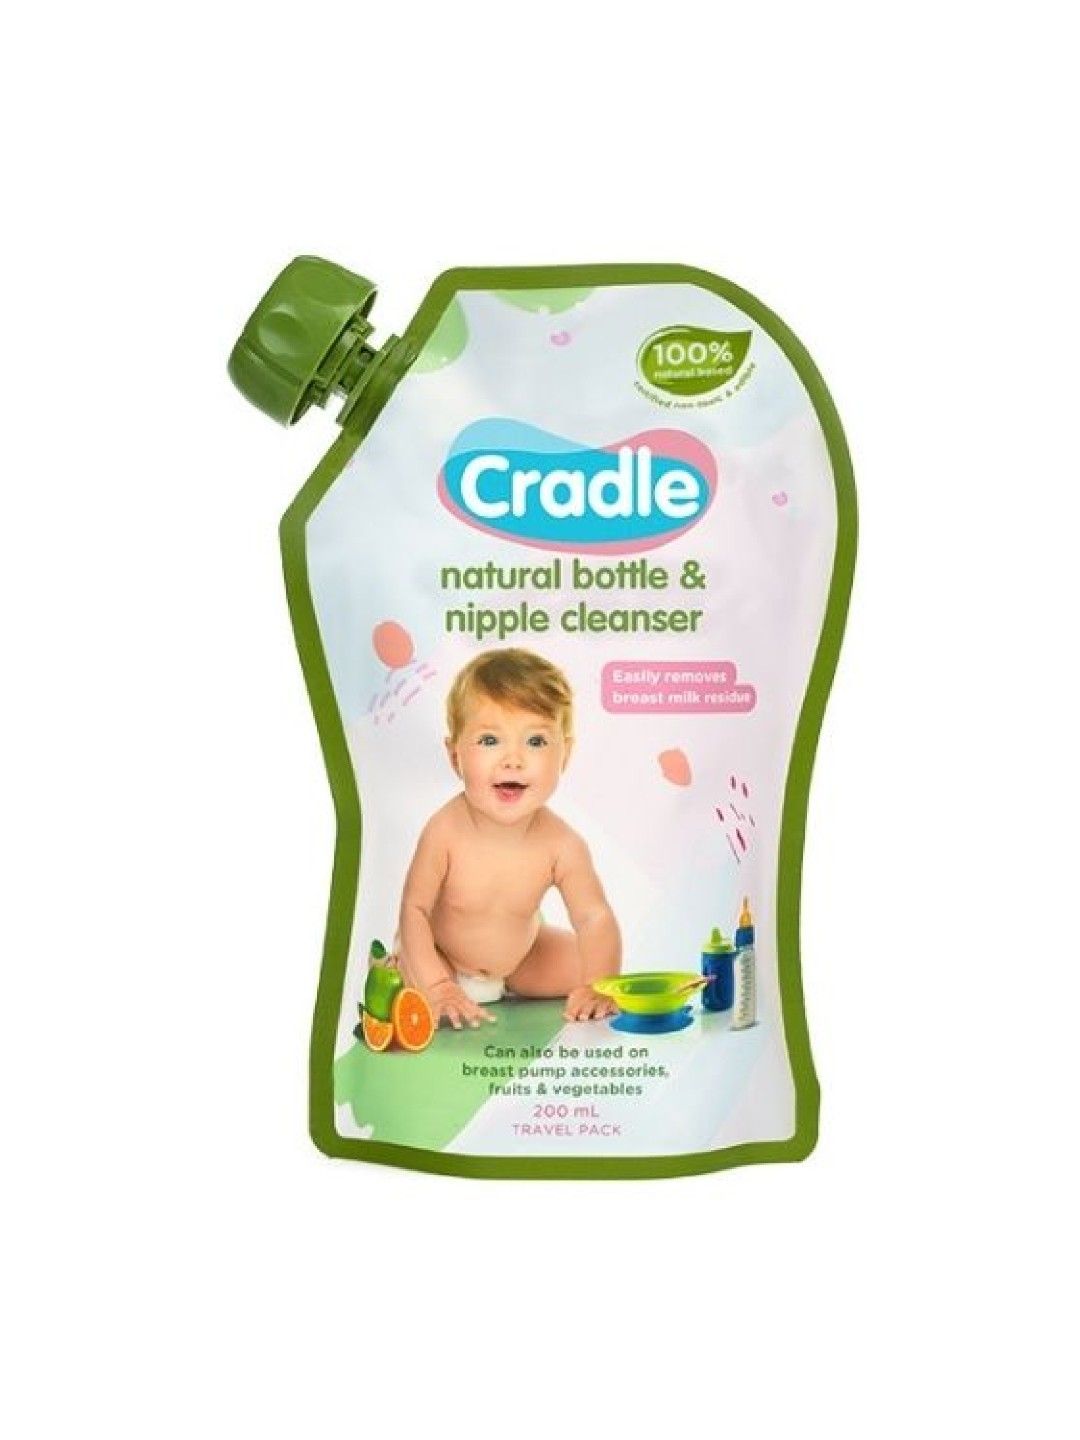 Cradle Natural Bottle and Nipple Cleanser Refill (200ml)